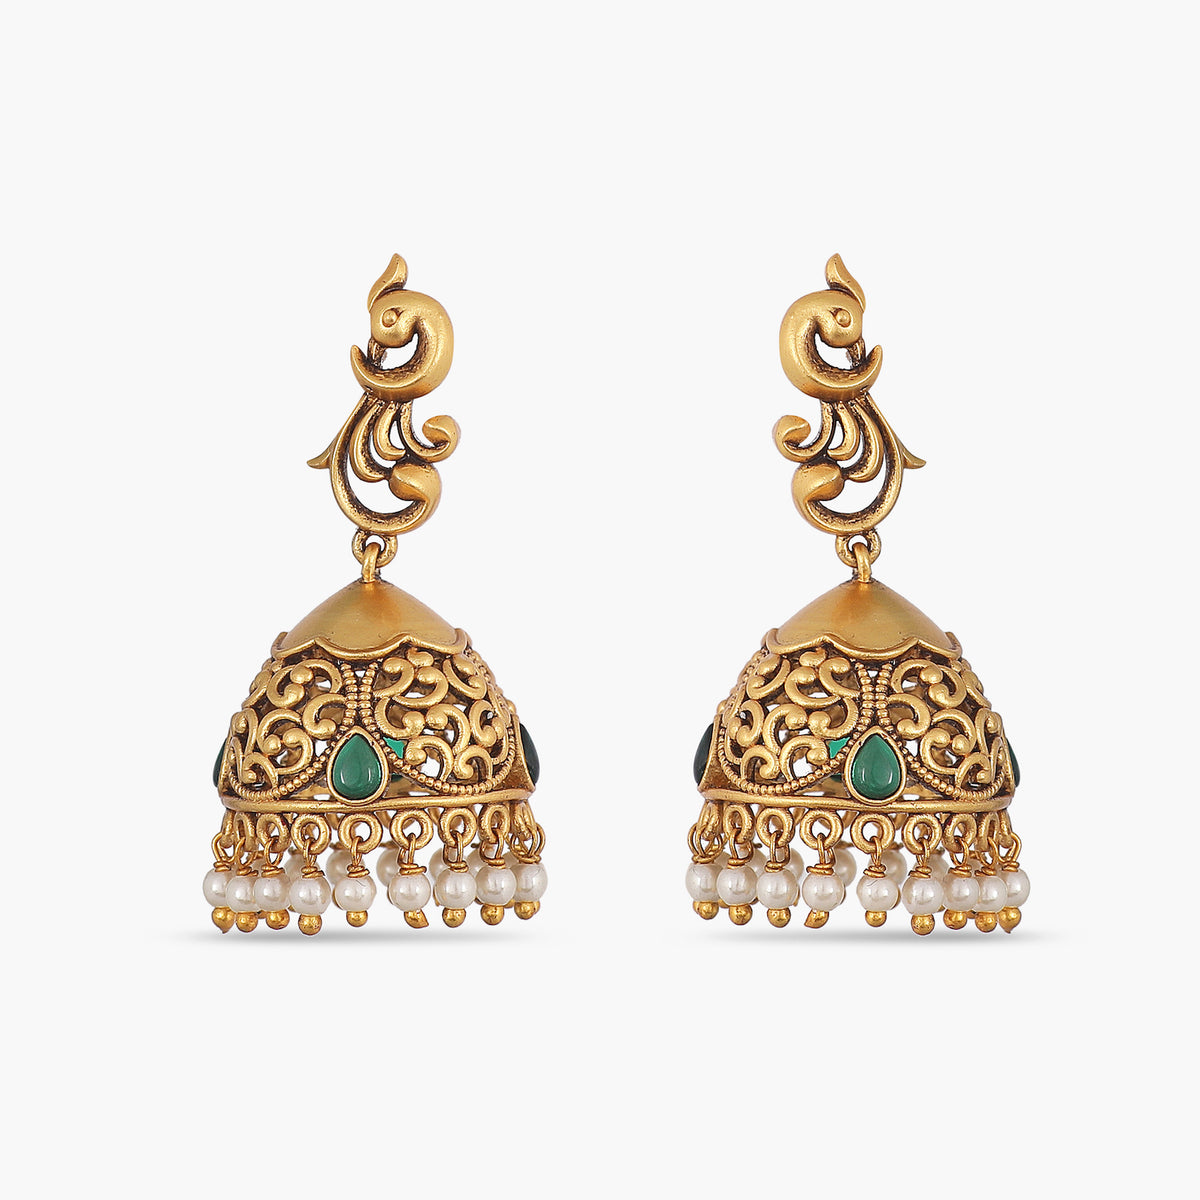 Elegance personified: Indian gold earrings with pearls and emeralds. 